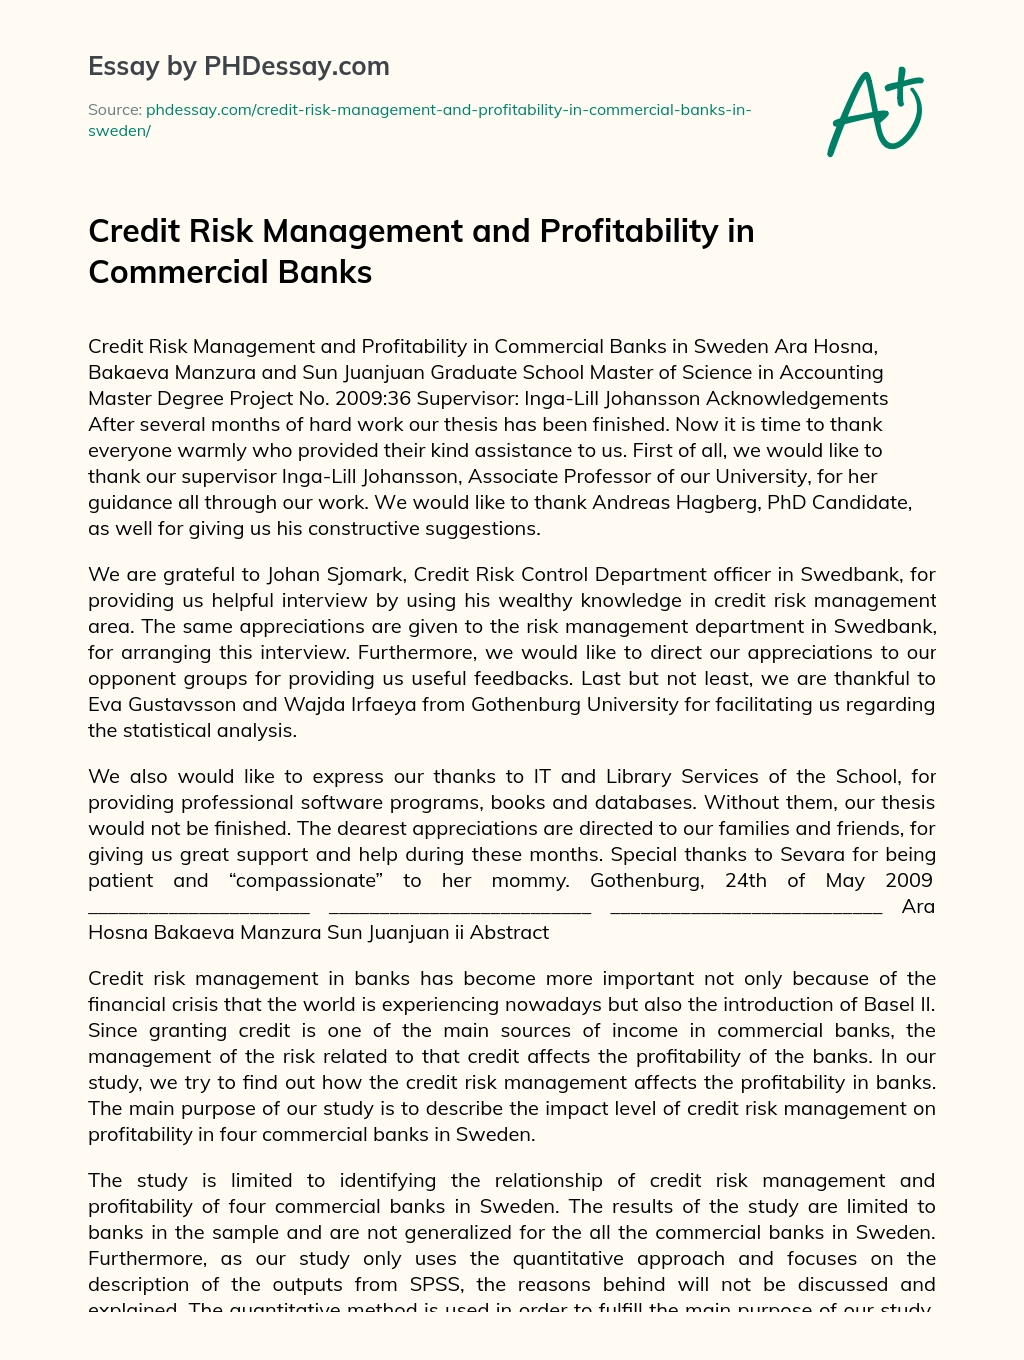 Credit Risk Management and Profitability in Commercial Banks essay